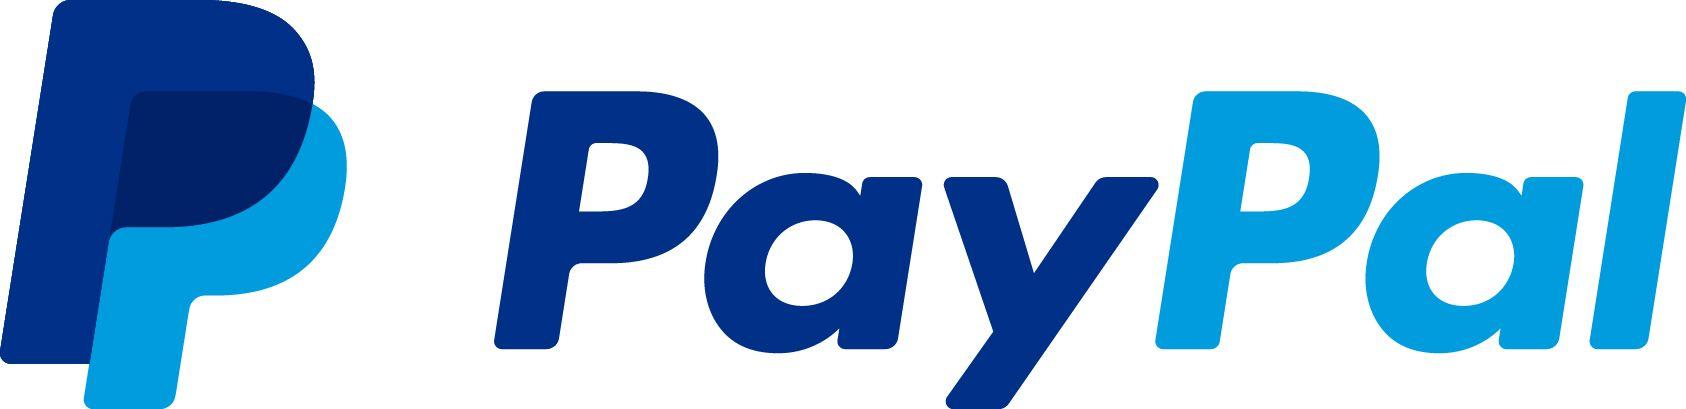 Paypal.com Logo - Media Resources - PayPal Stories